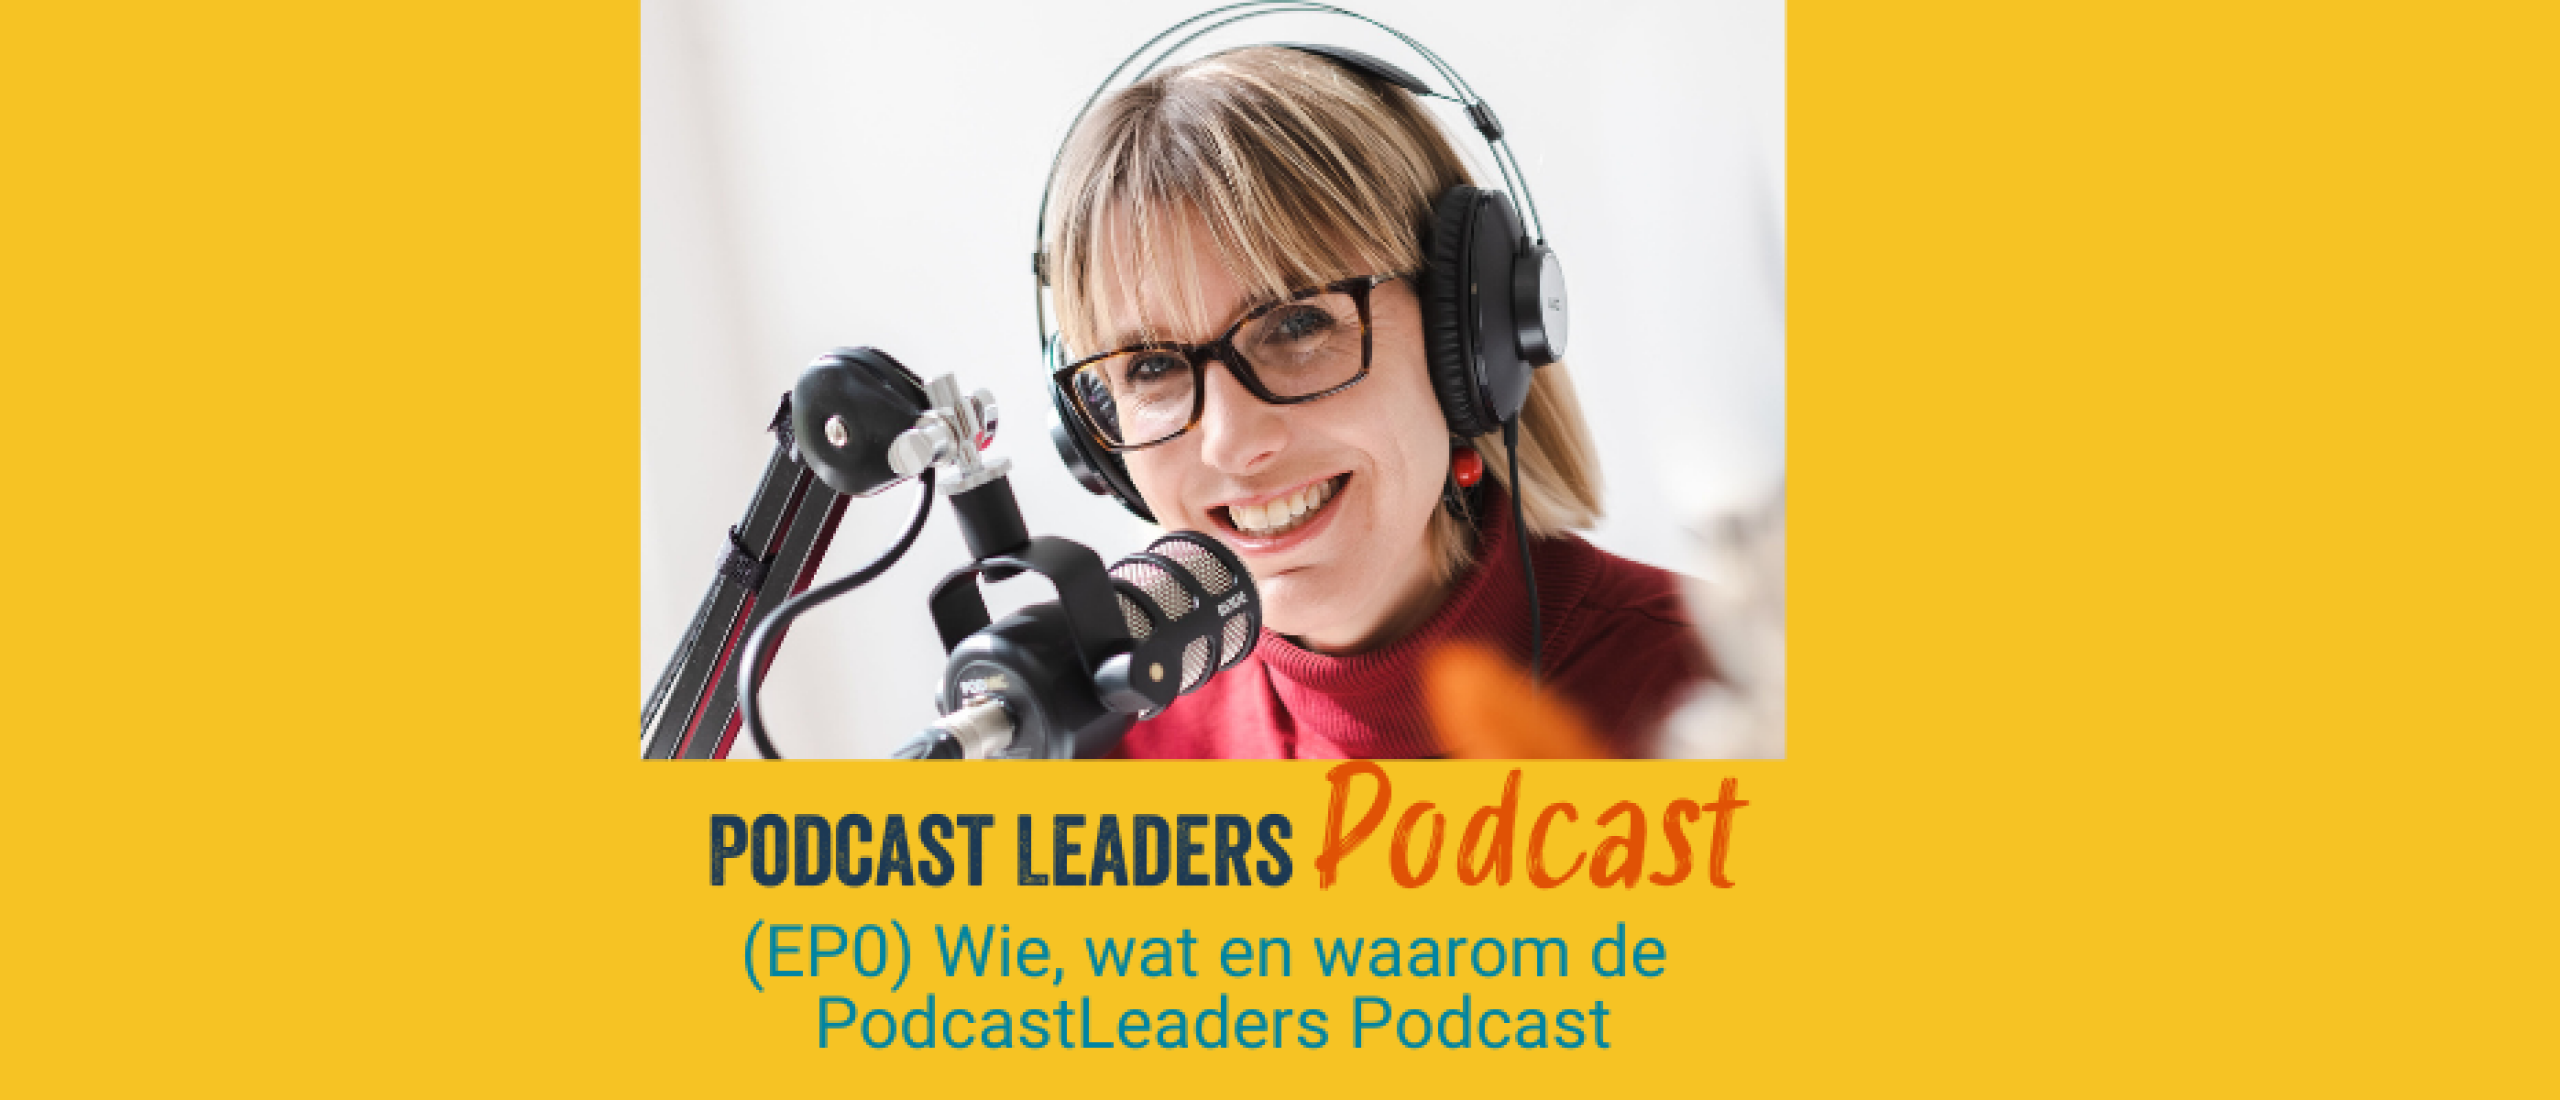 EP0 PodcastLeaders Podcast